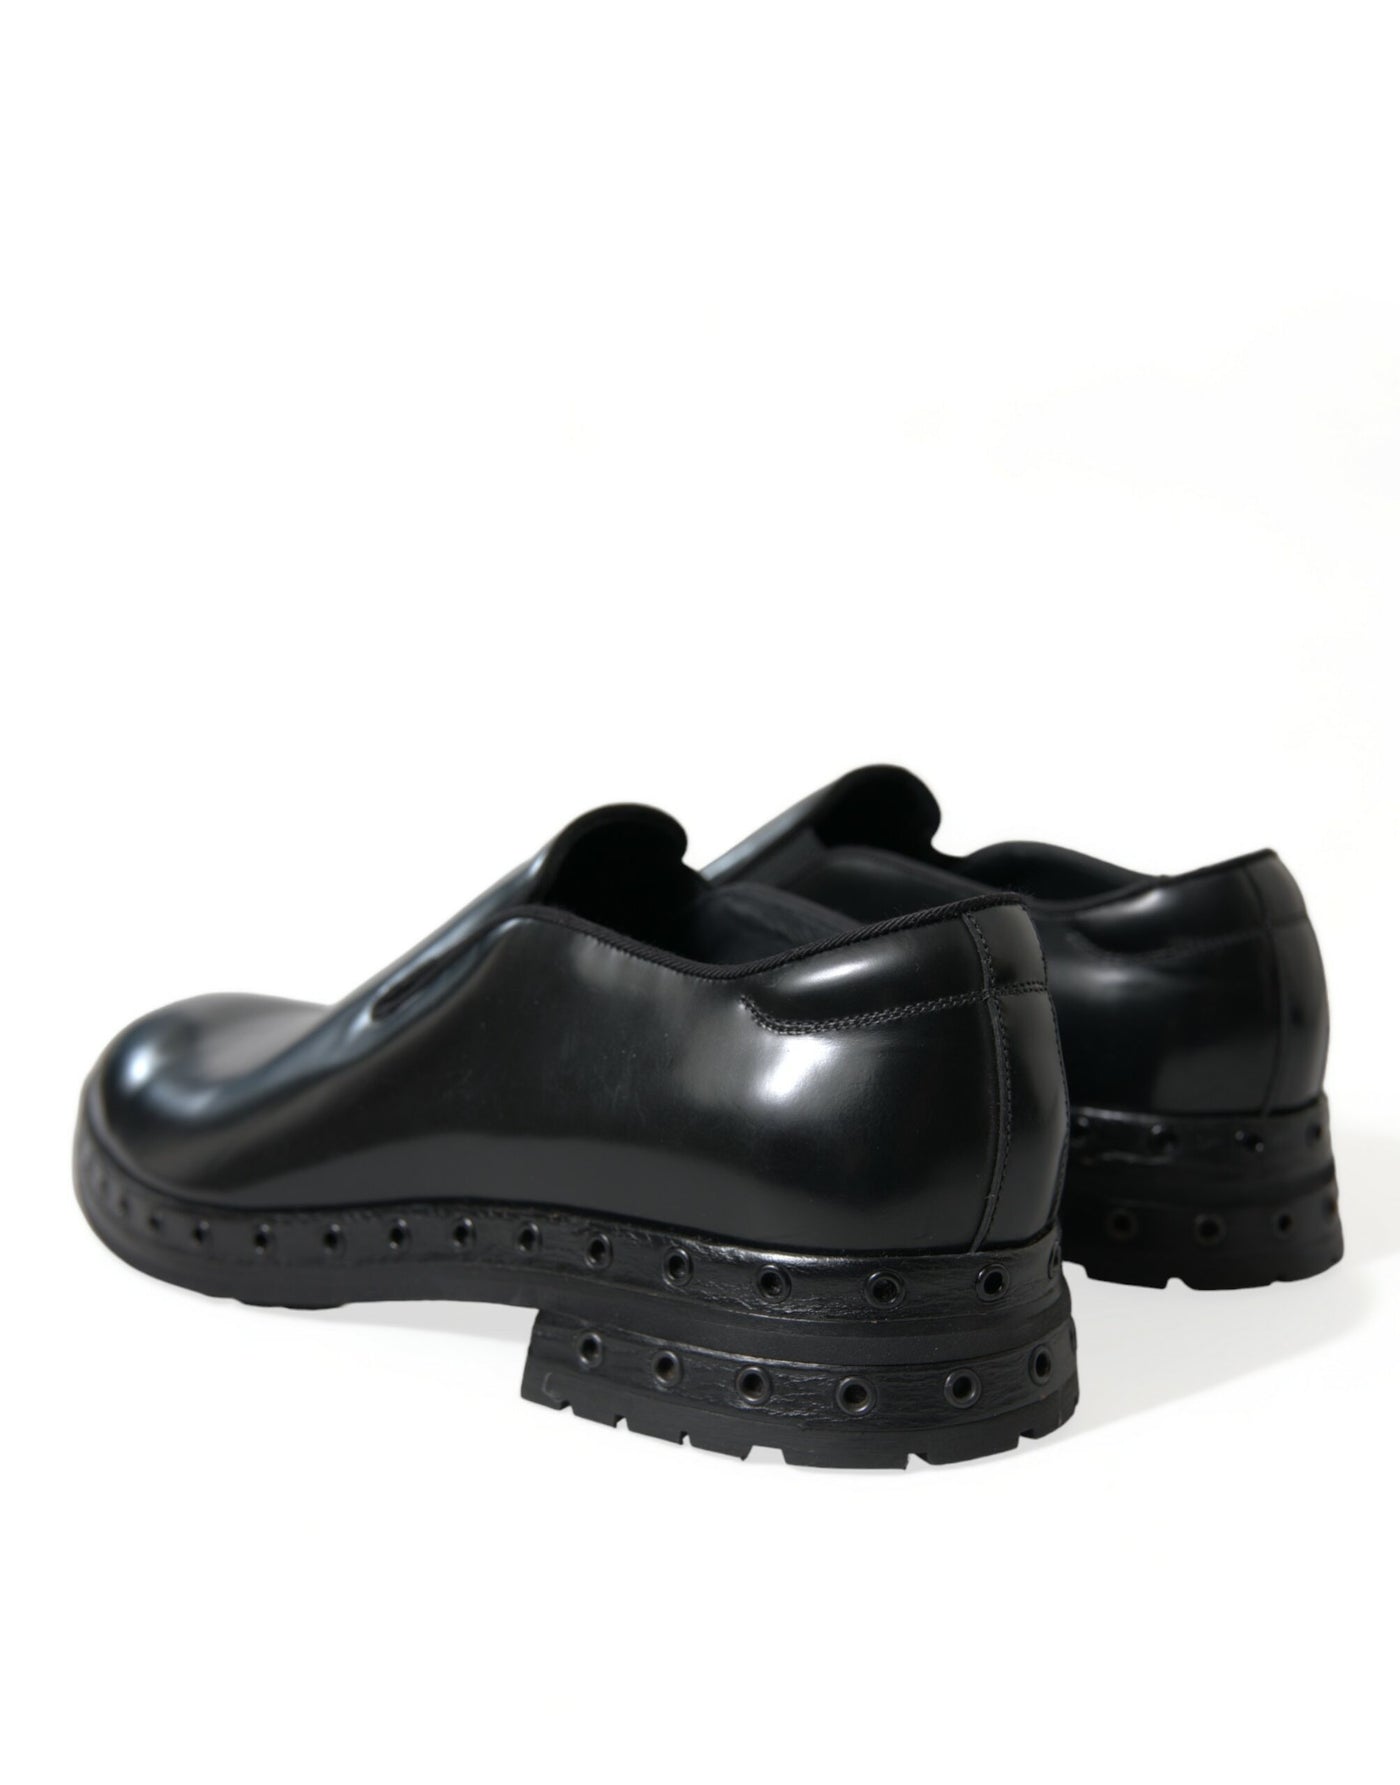 Dolce & Gabbana Black Leather Studded Loafers Dress Shoes